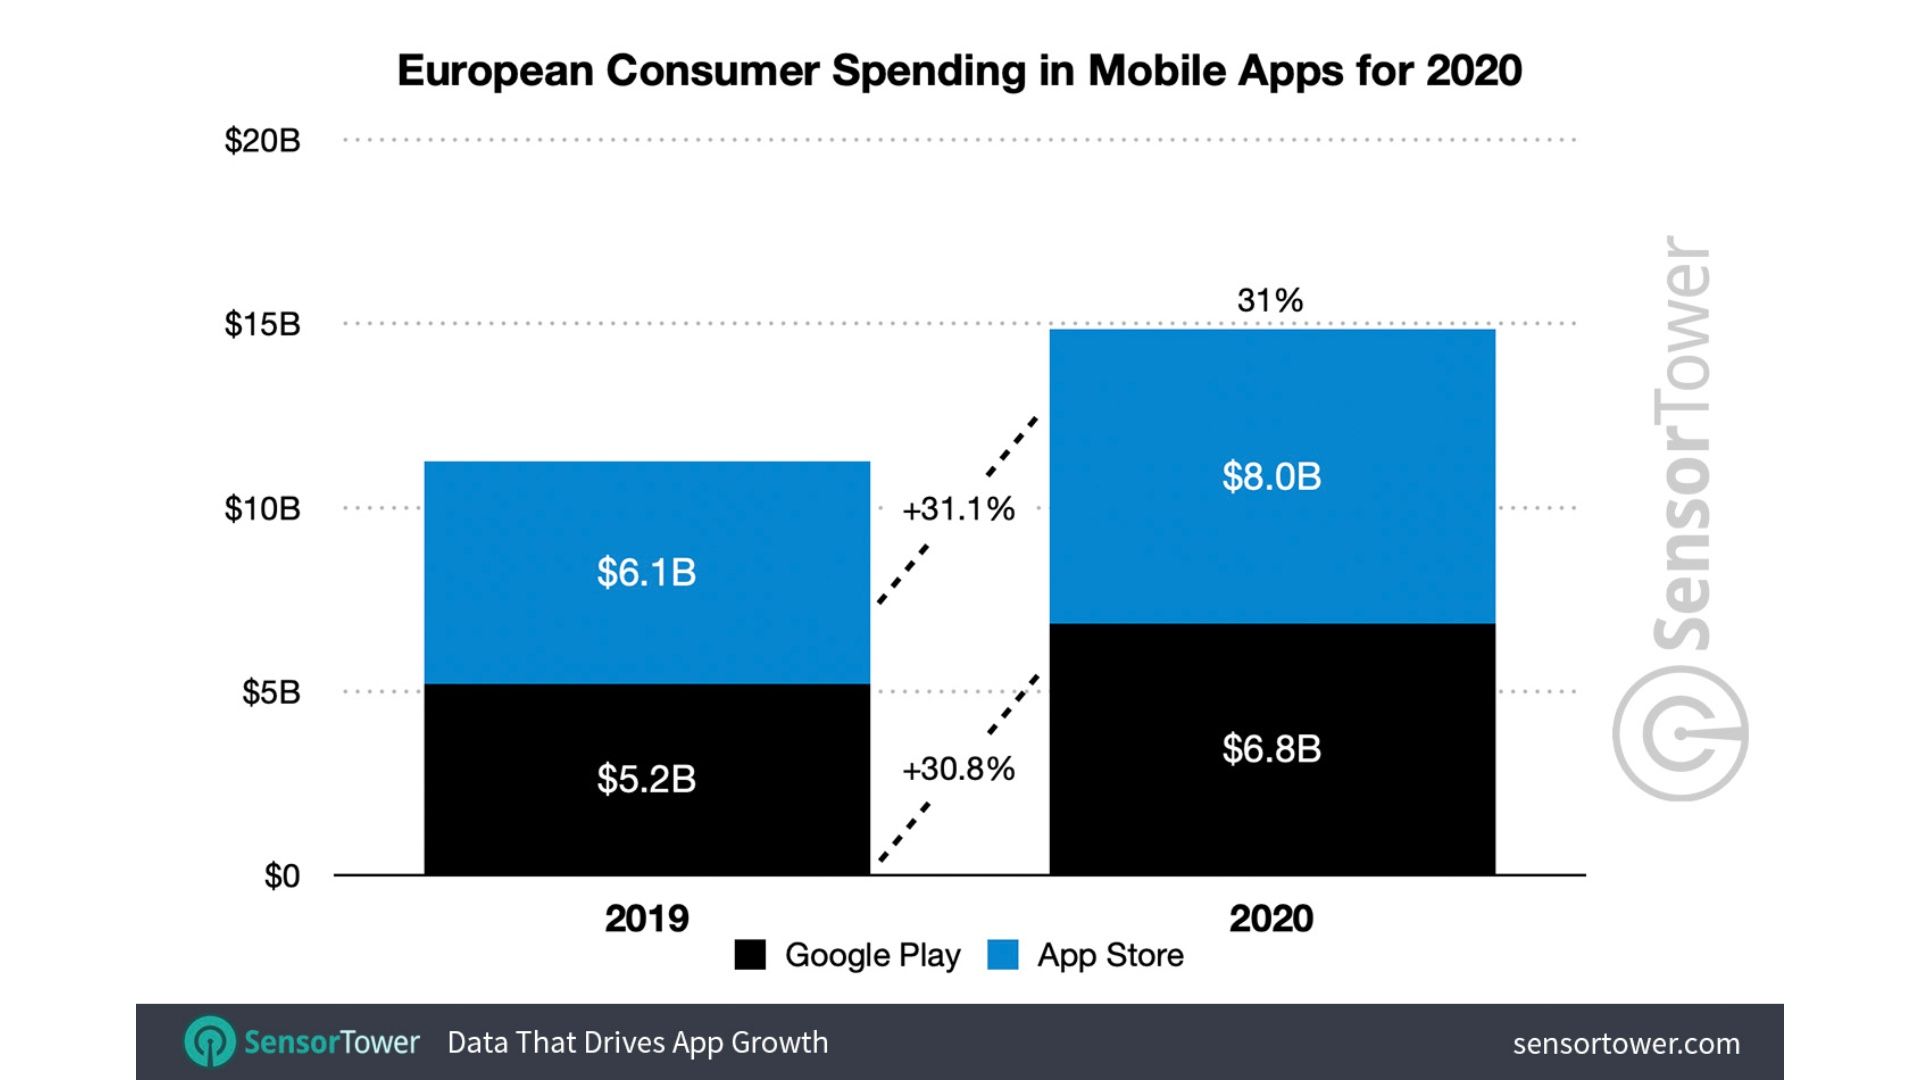 Europeans spent $14.8 billion across the App Store and Google Play during 2020